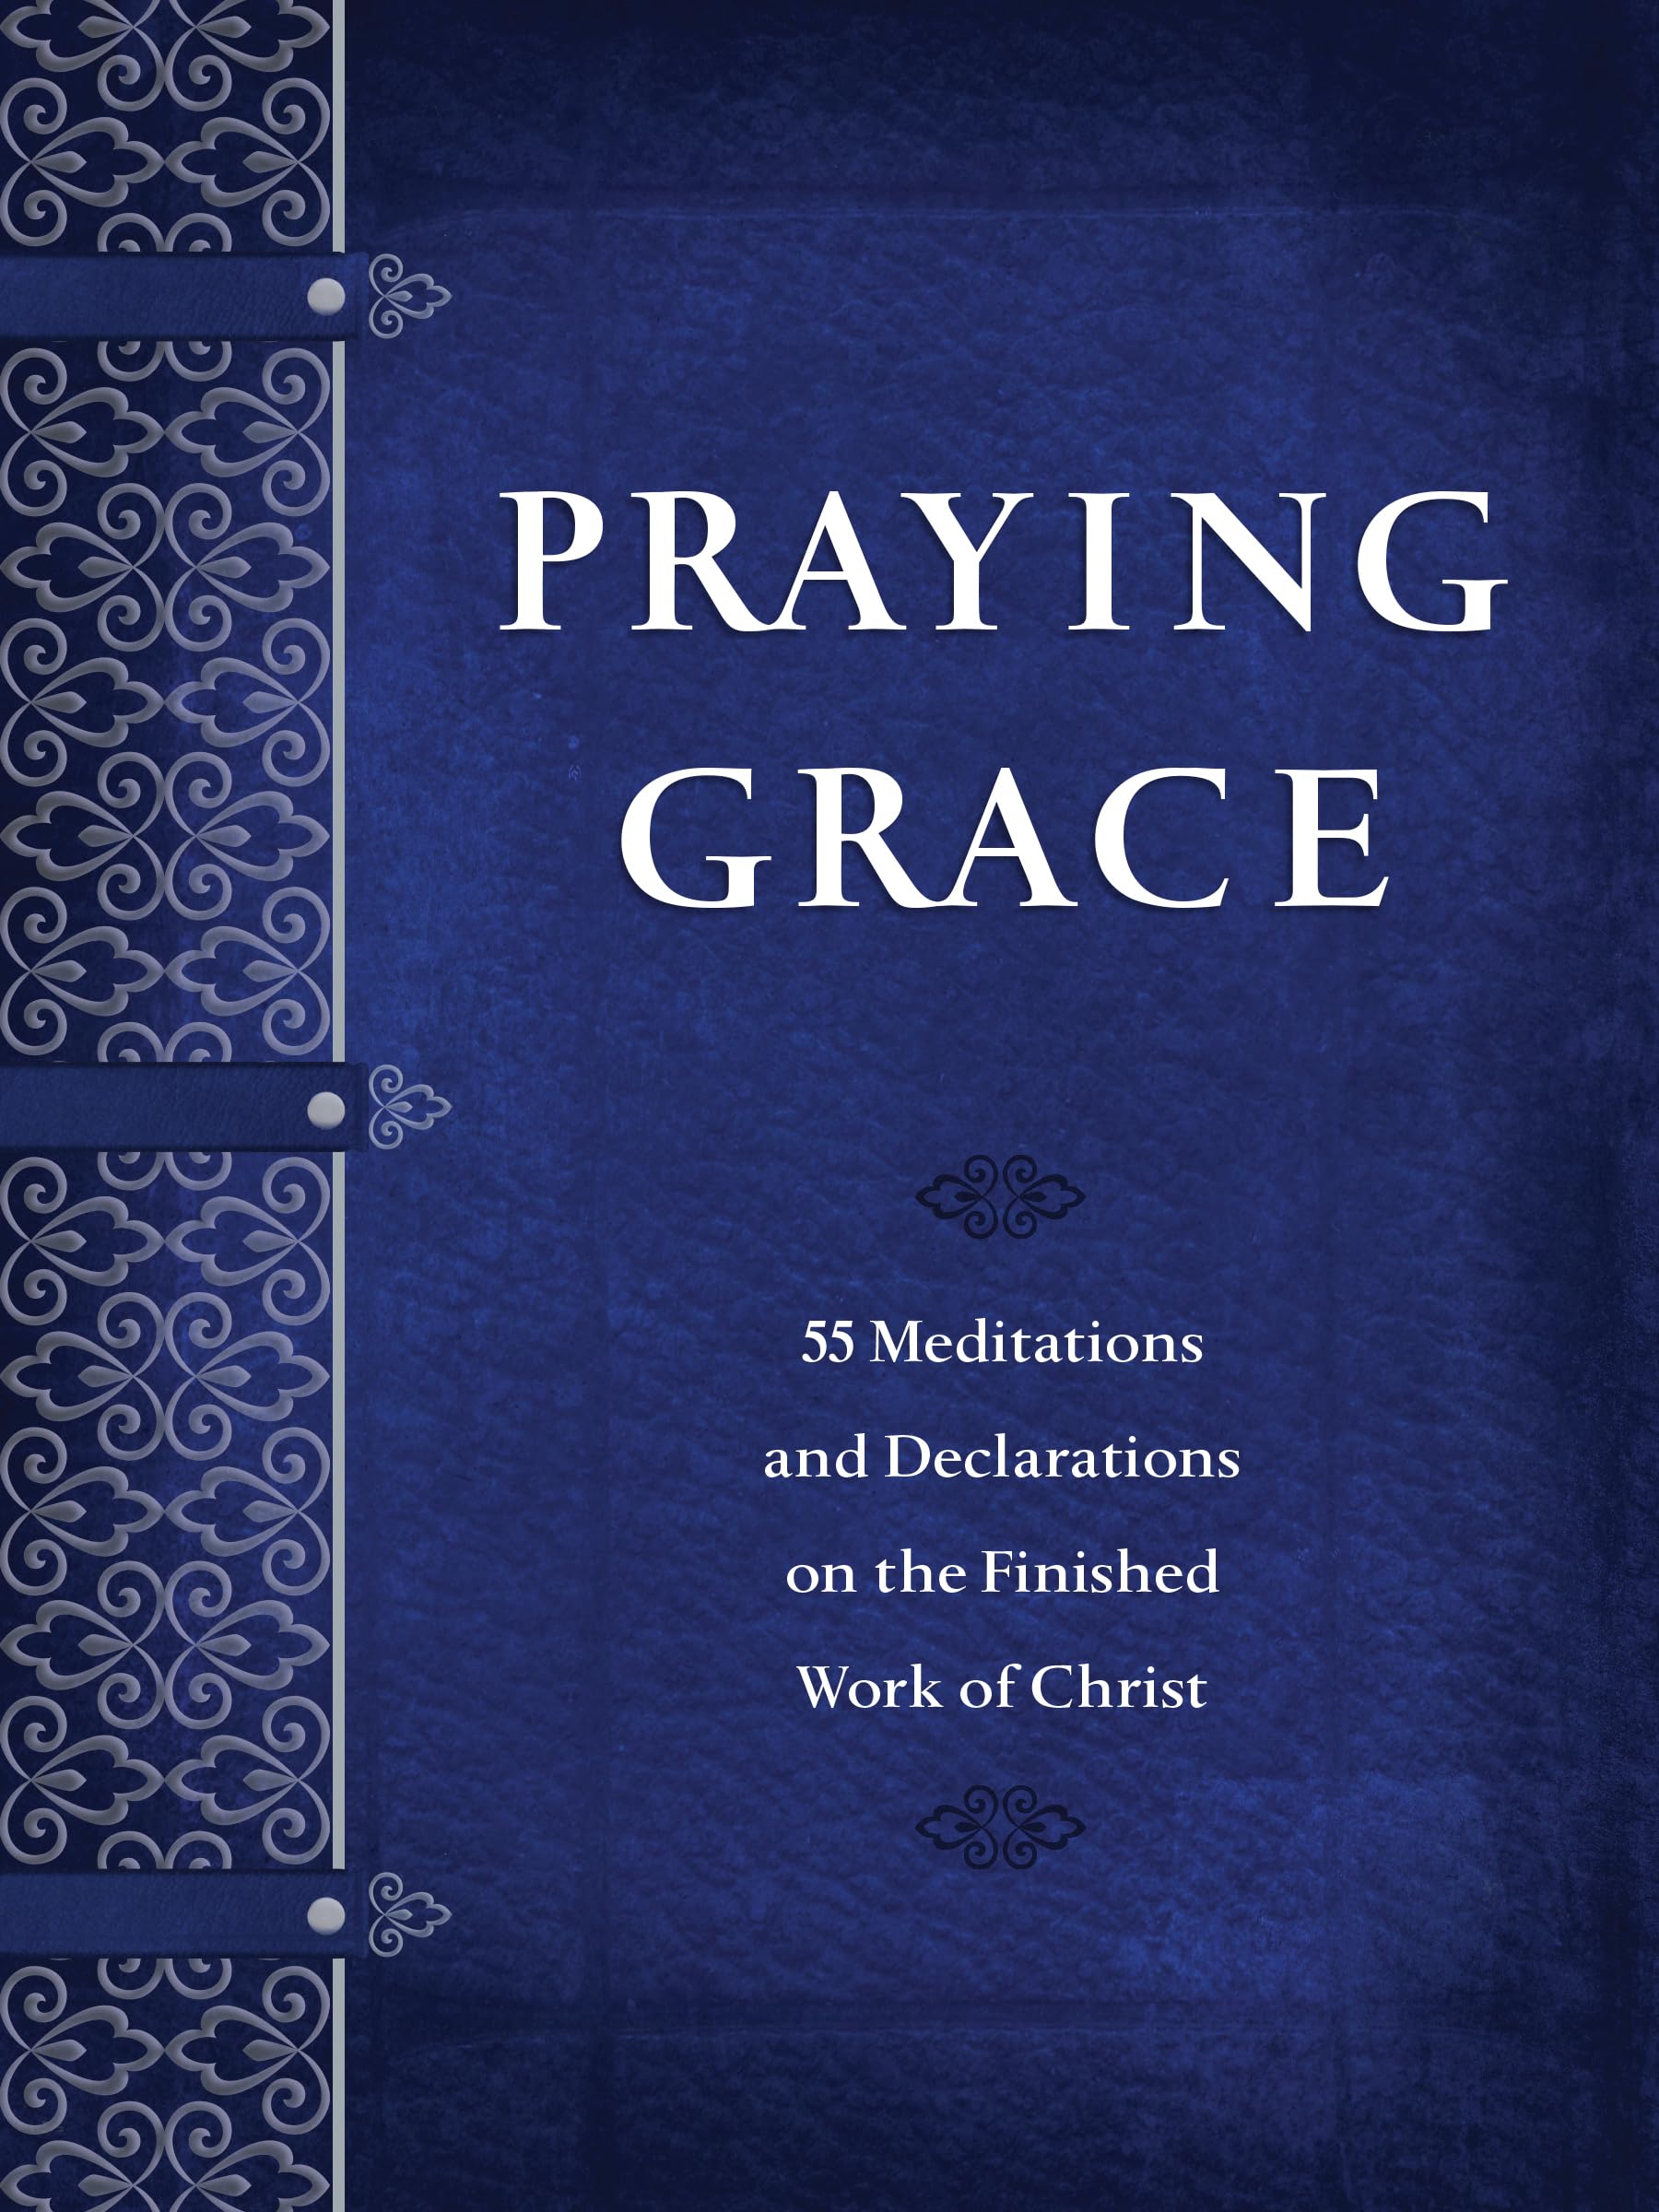 Praying Grace: 55 Meditations and Declarations on the Finished Work of Christ by Holland, David A.